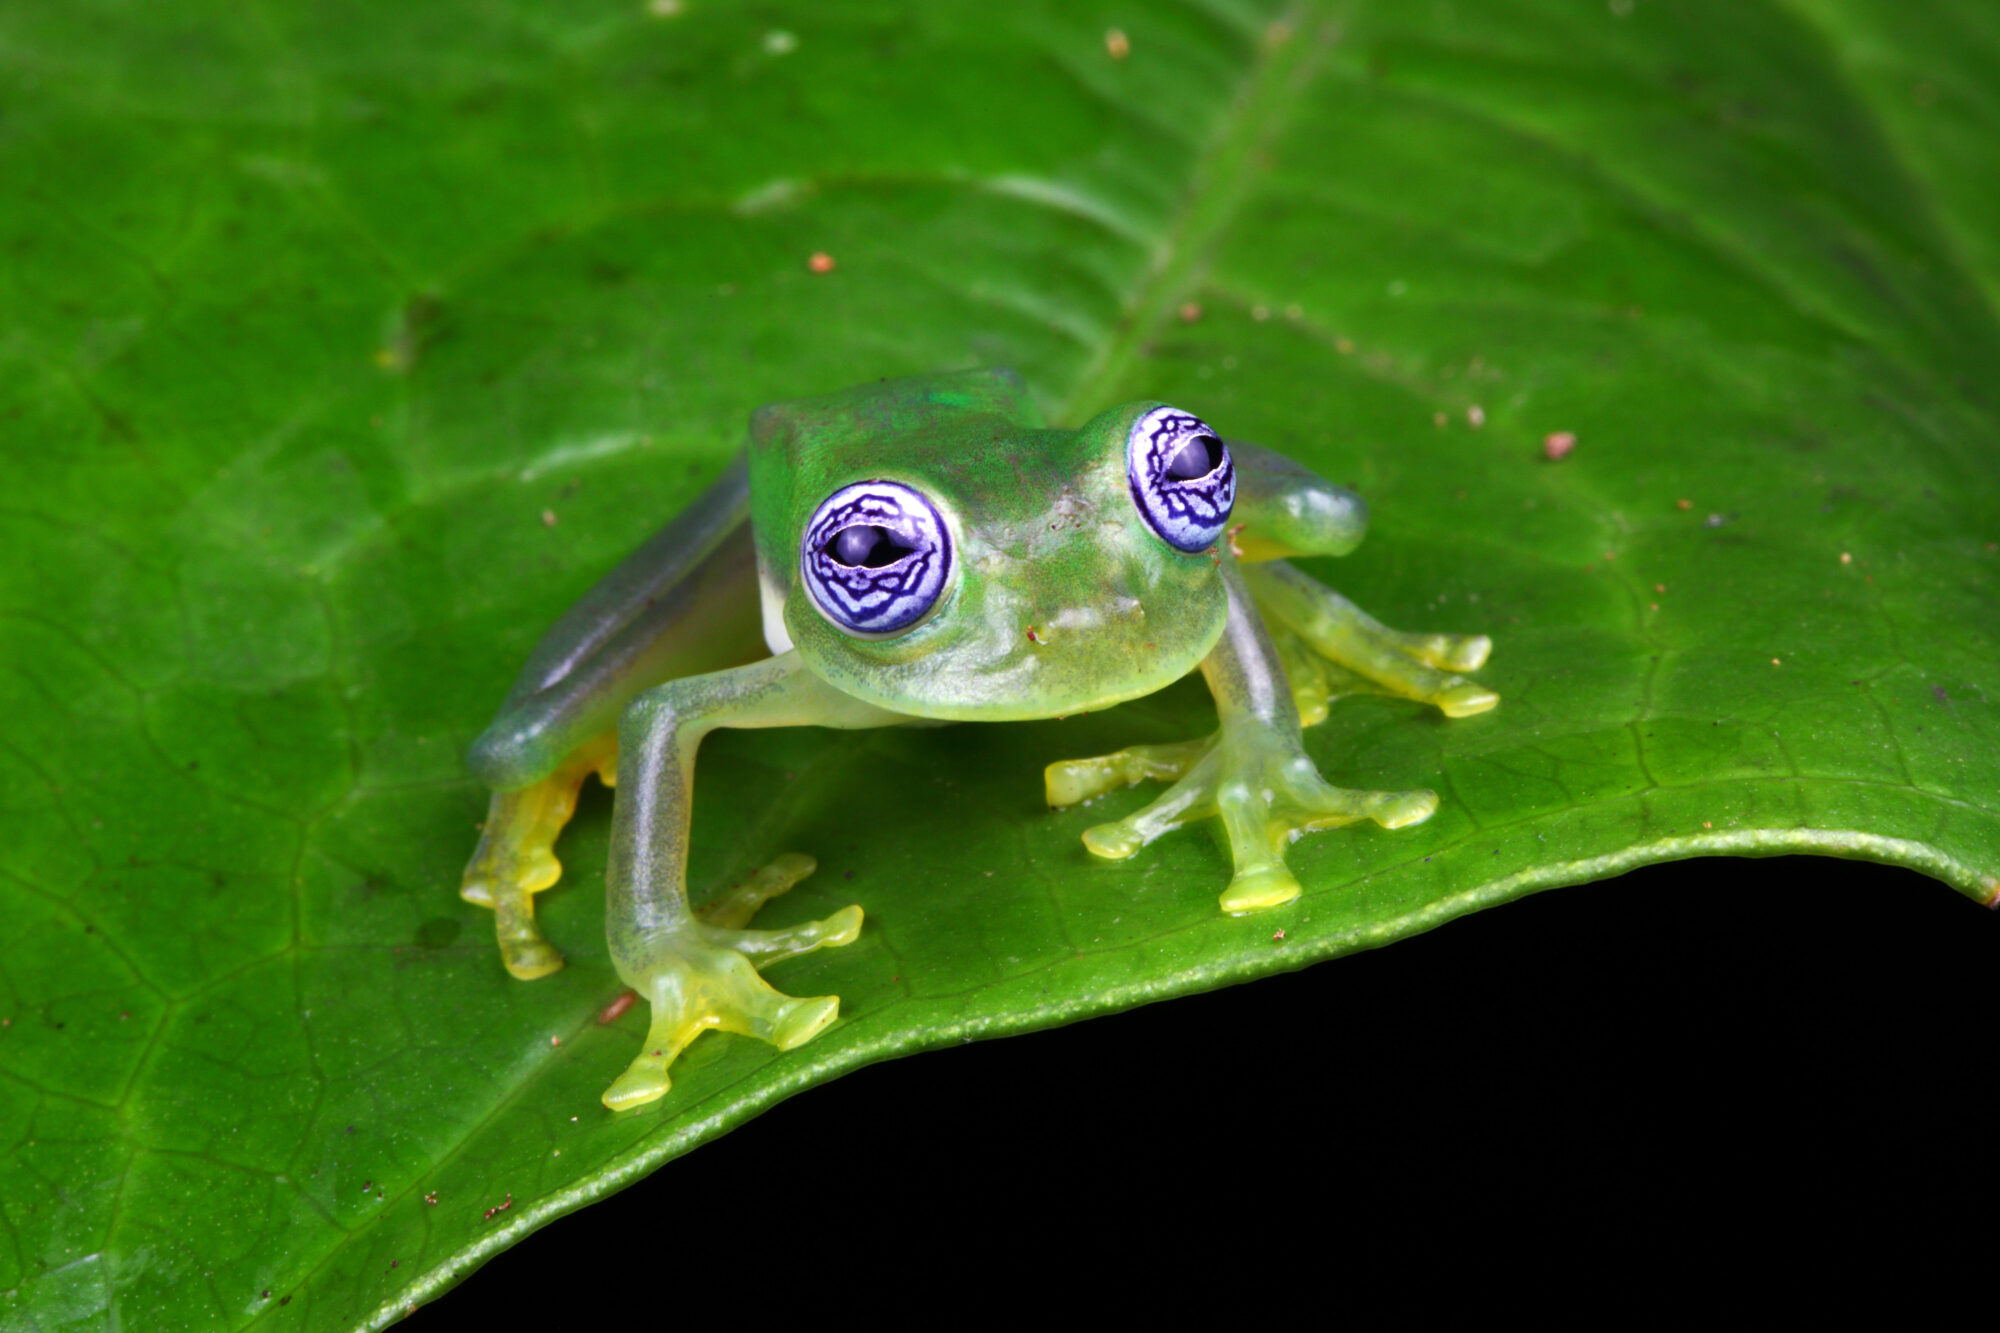 <p><span style="font-weight: 400;">International trade in glass frogs, a family of frogs native to Central and South America, will be regulated thanks to decisions made last week in Panama (Image: George Grall / Alamy)</span></p>